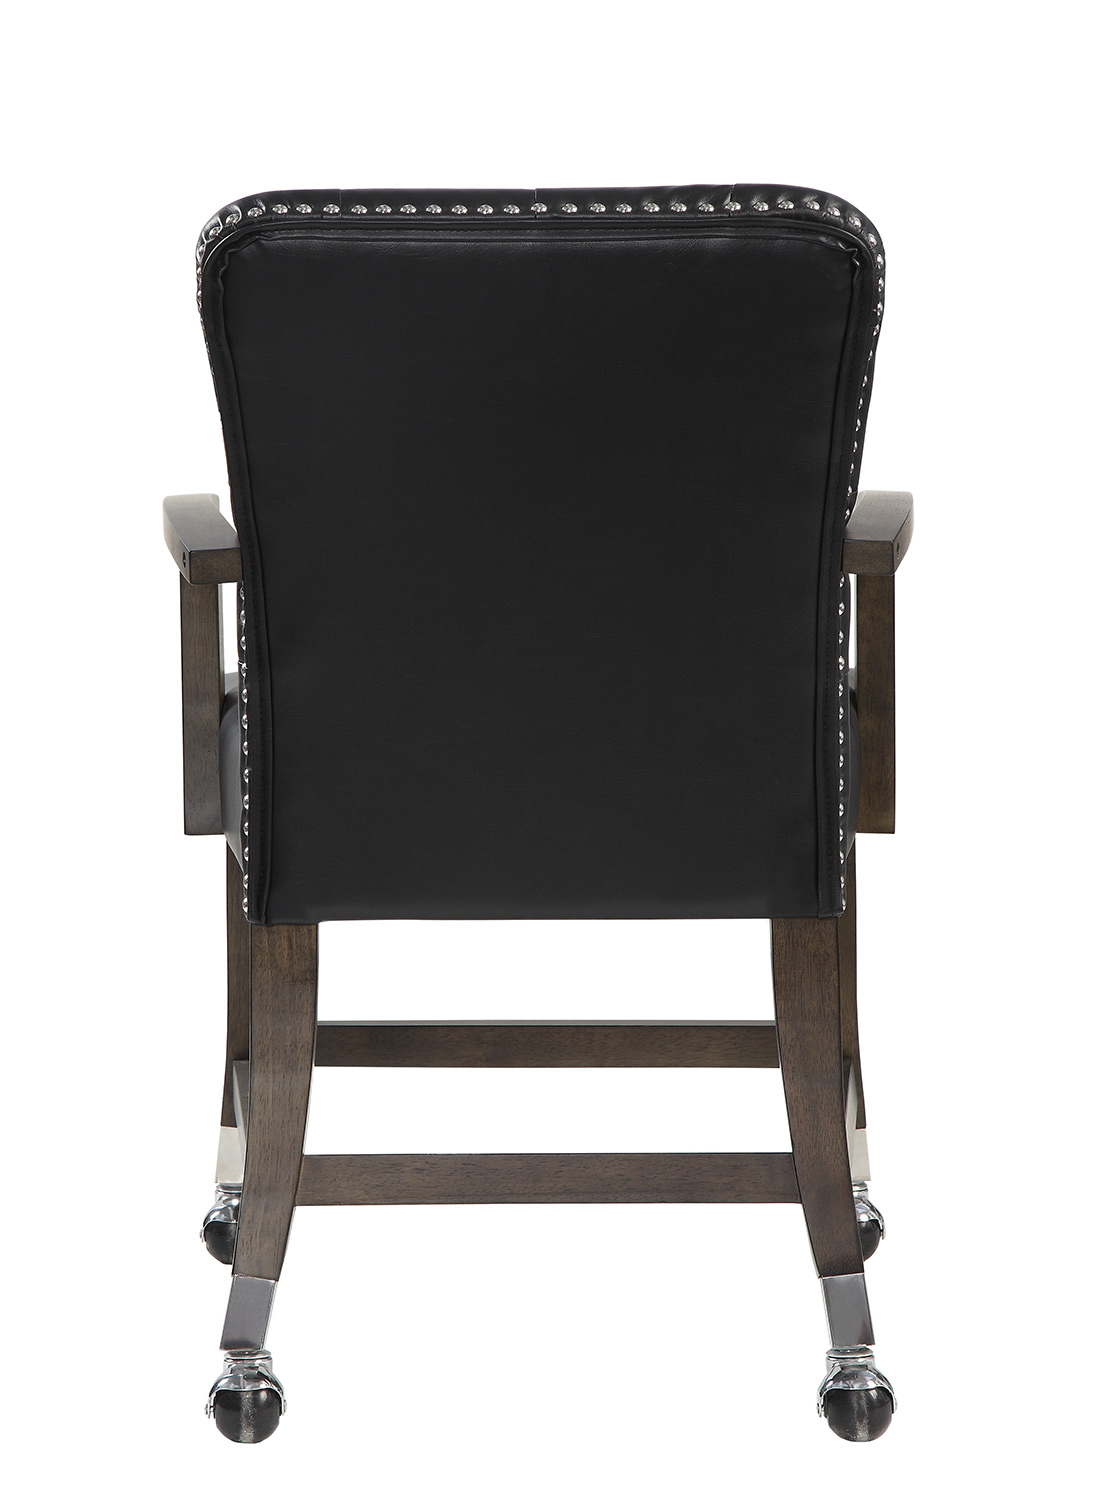 Homelegance Ante Tufted Arm Chair with Casters - Dark Brown